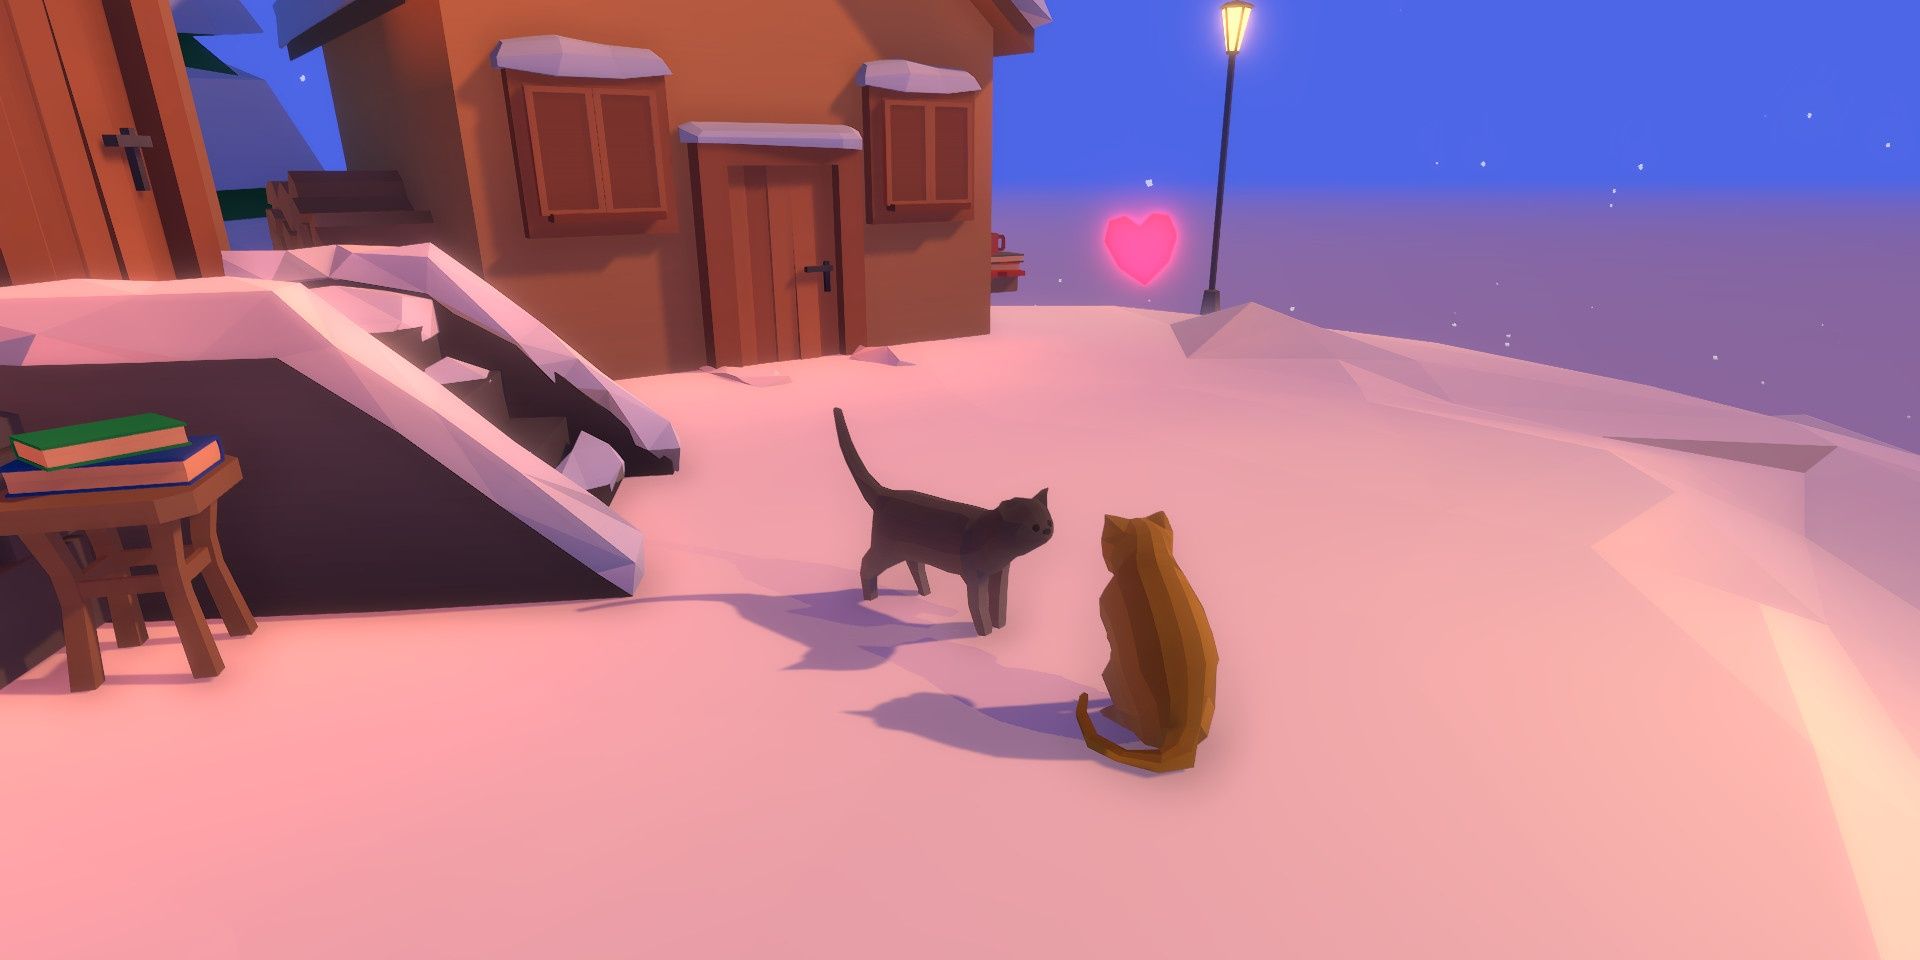 Two cats in a Hidden Paws level in love